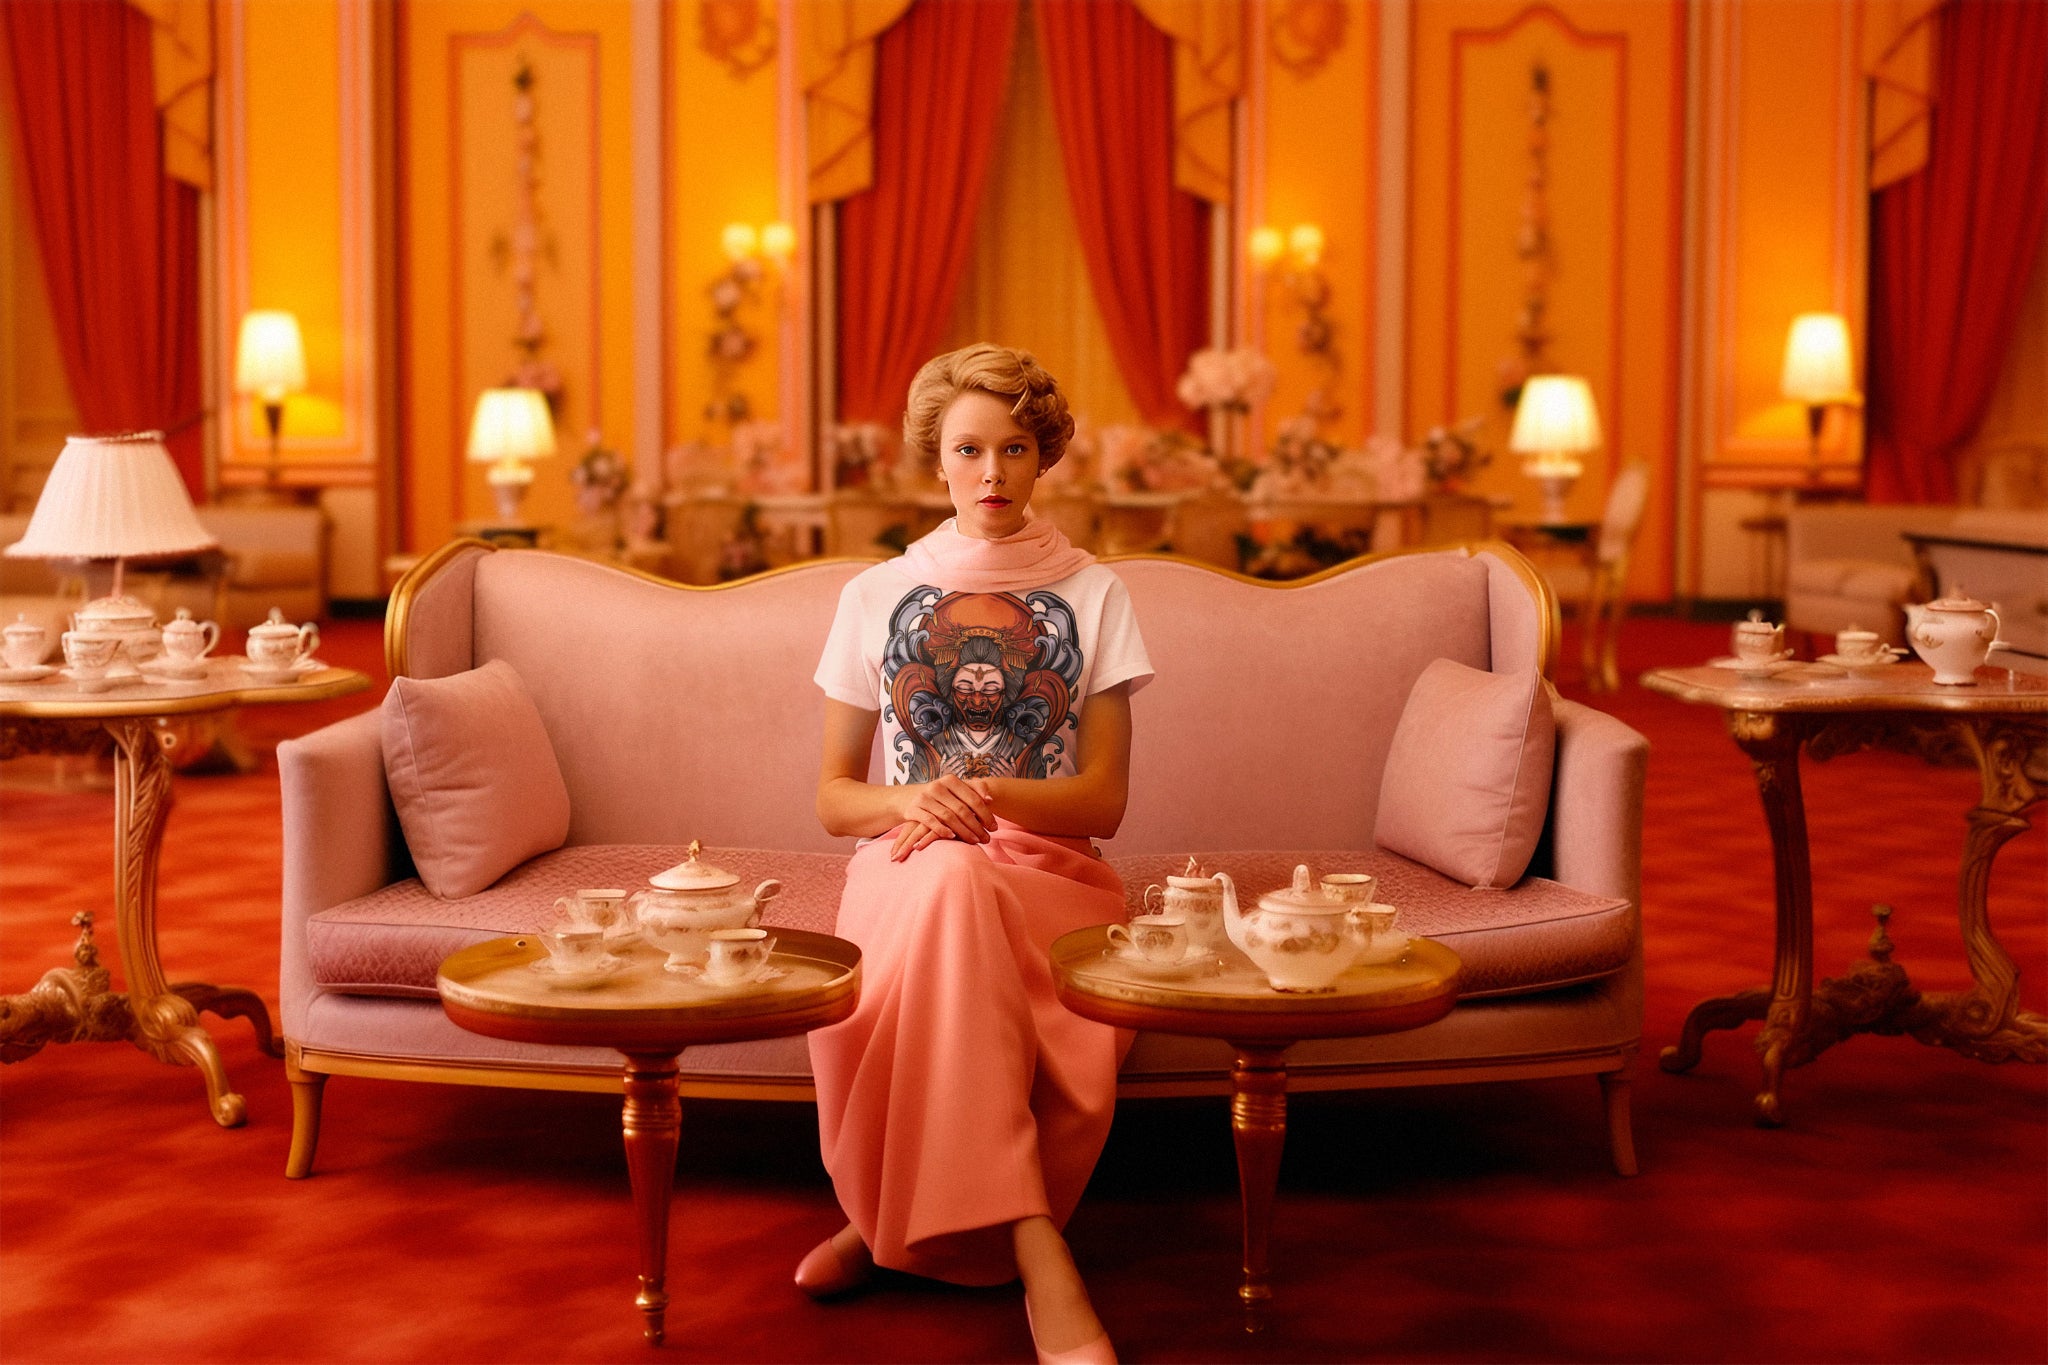 wes-anderson-inspired-tee-mockup-of-a-woman-sitting-in-an-elegant-room-with-a-vintage-style-wearing-a-TeeStitch-Geisha-design